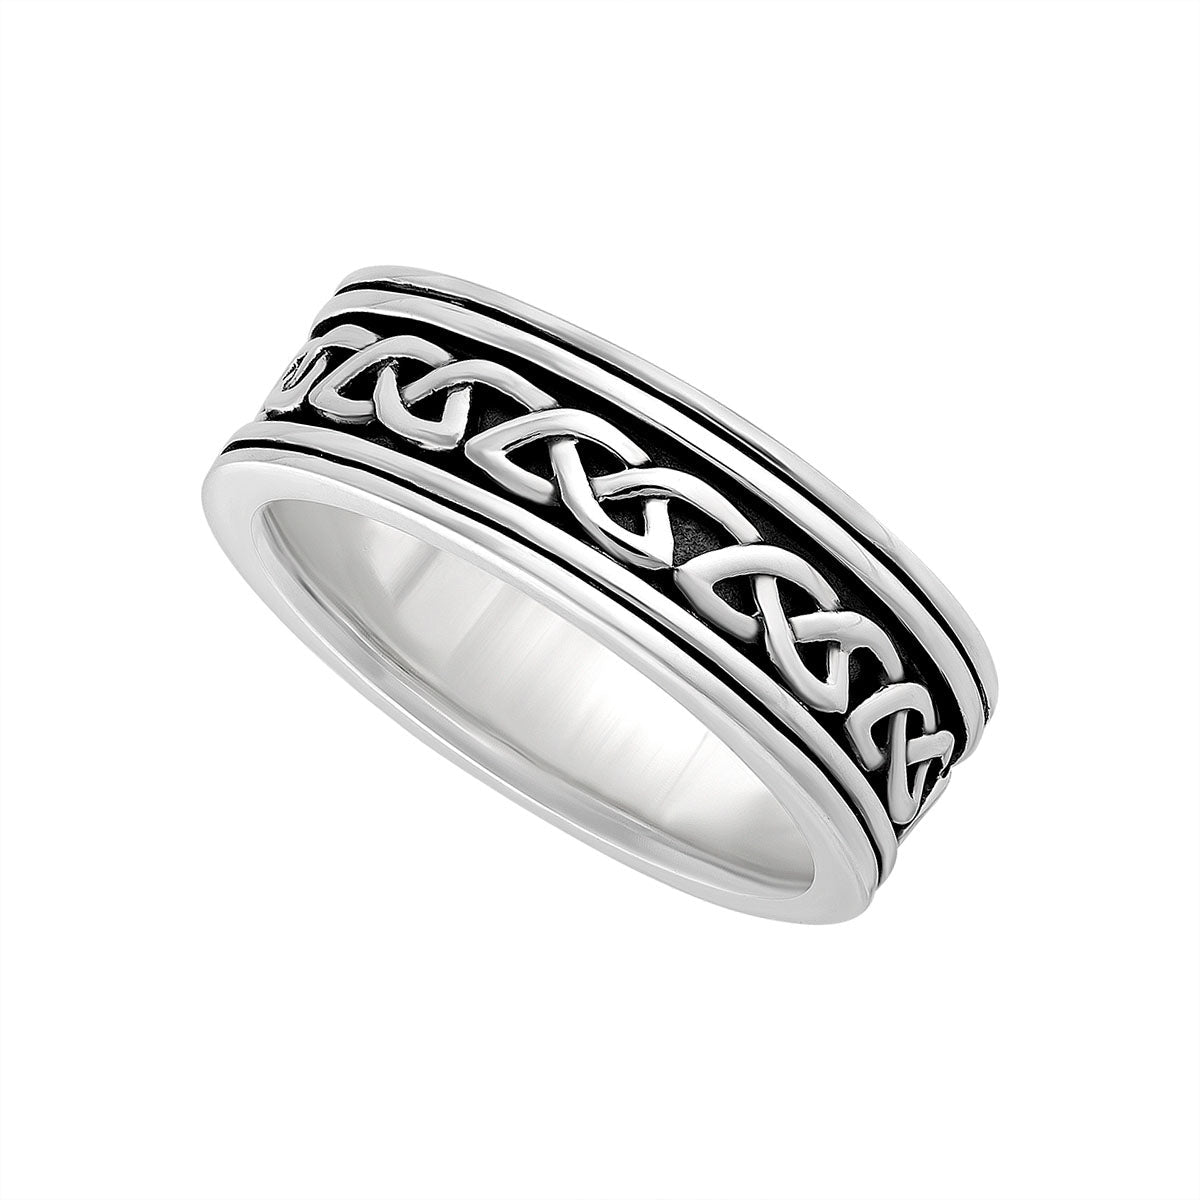 Gents sterling silver Celtic knot band ring for s21073 from Solvar